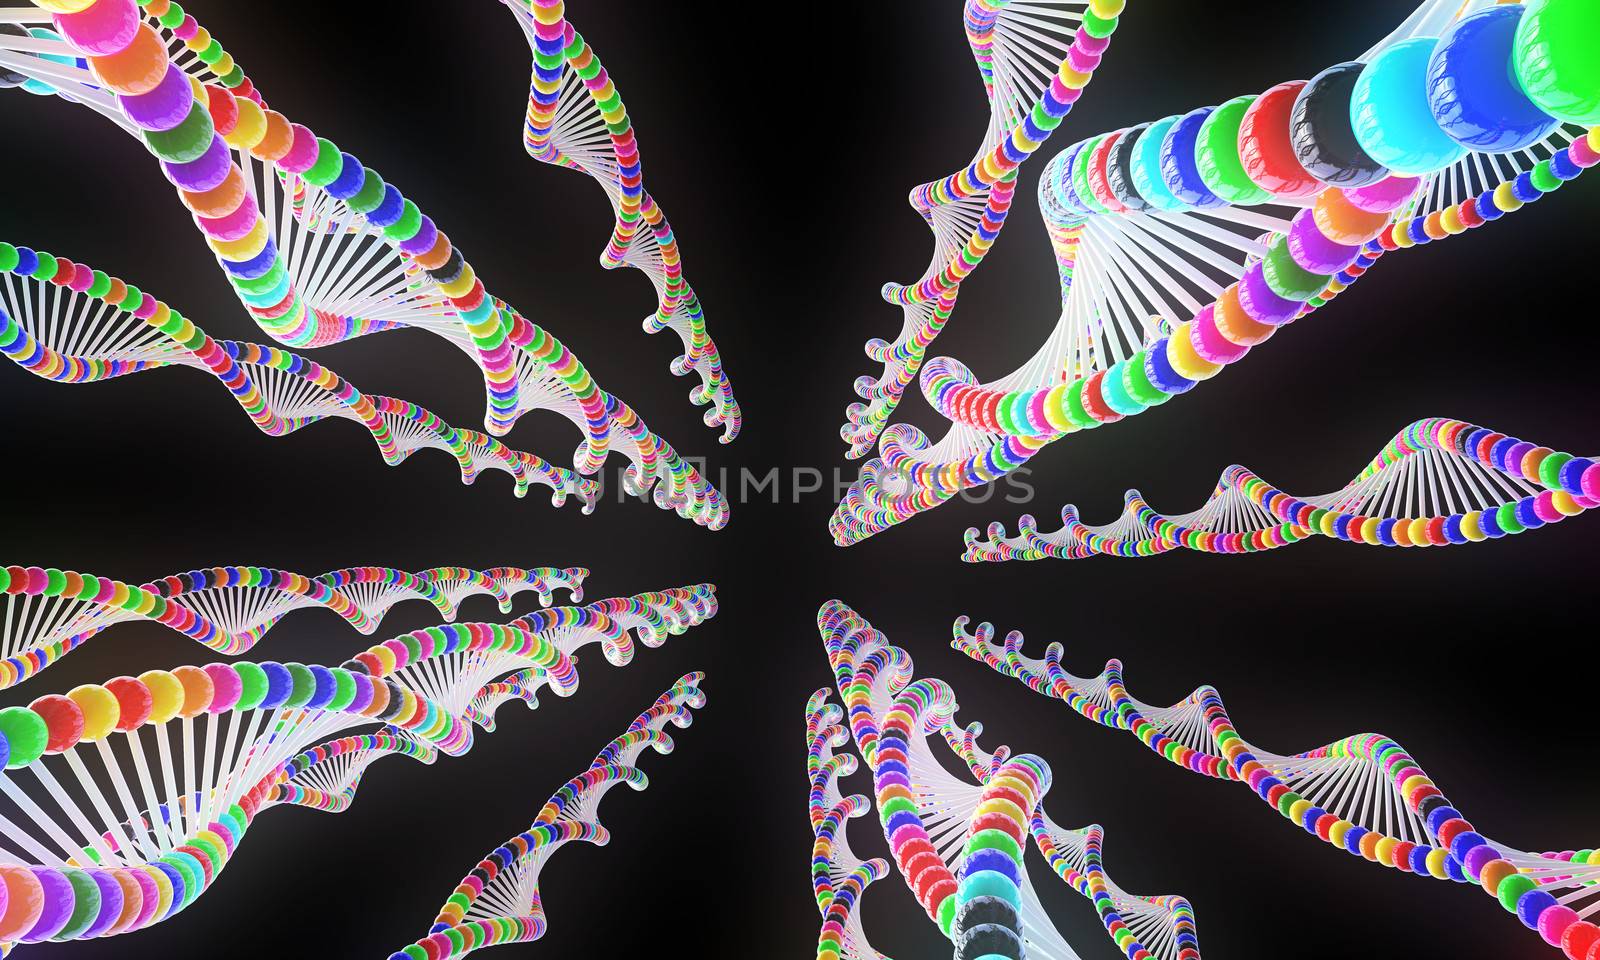 3d composition of deoxyribonucleic acid helix structure dna isolated on black